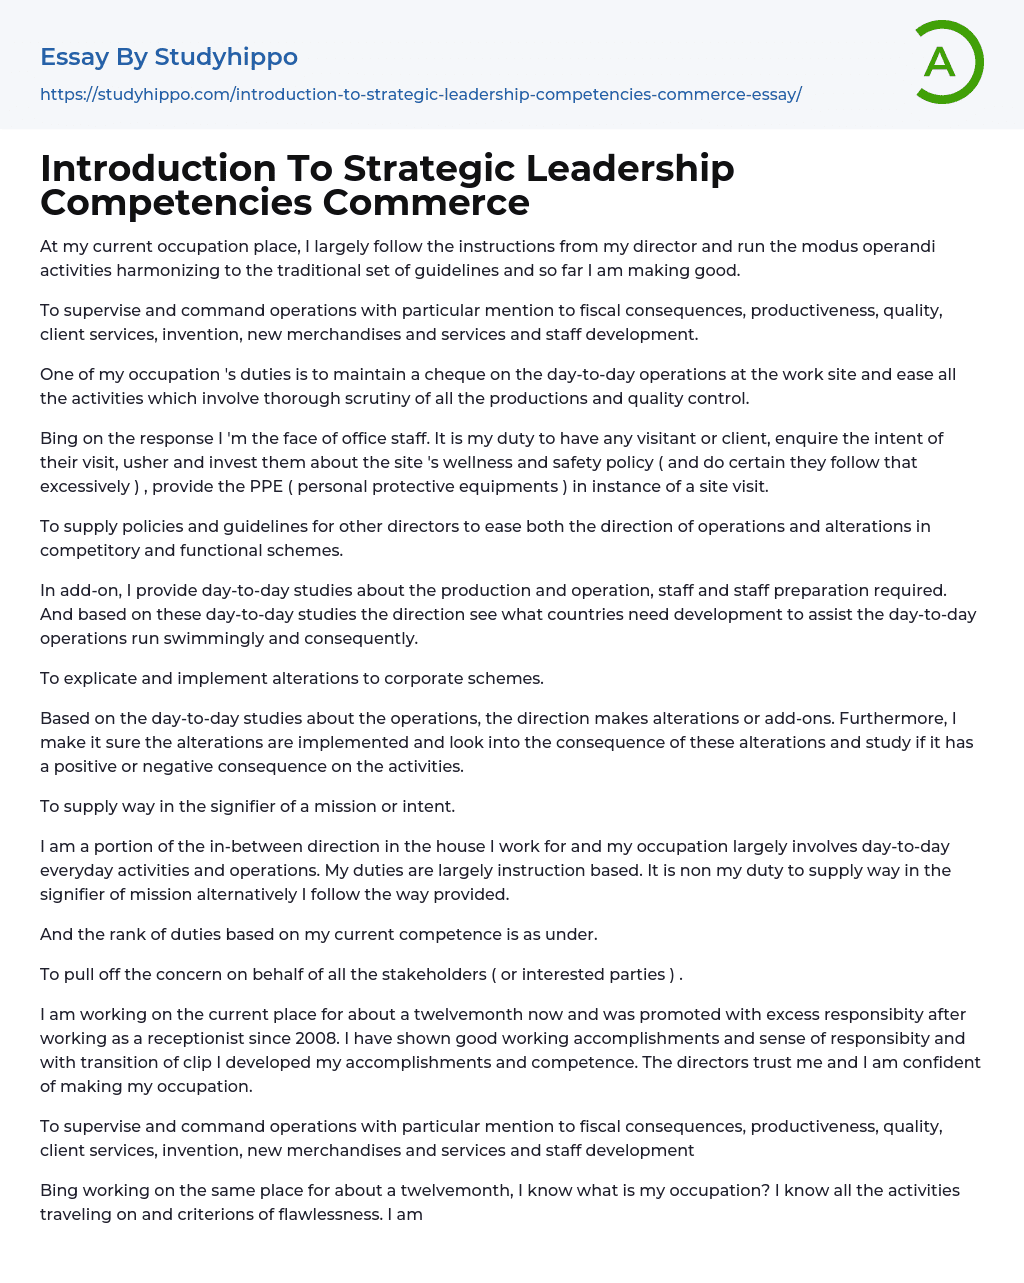 Introduction To Strategic Leadership Competencies Commerce Essay Example